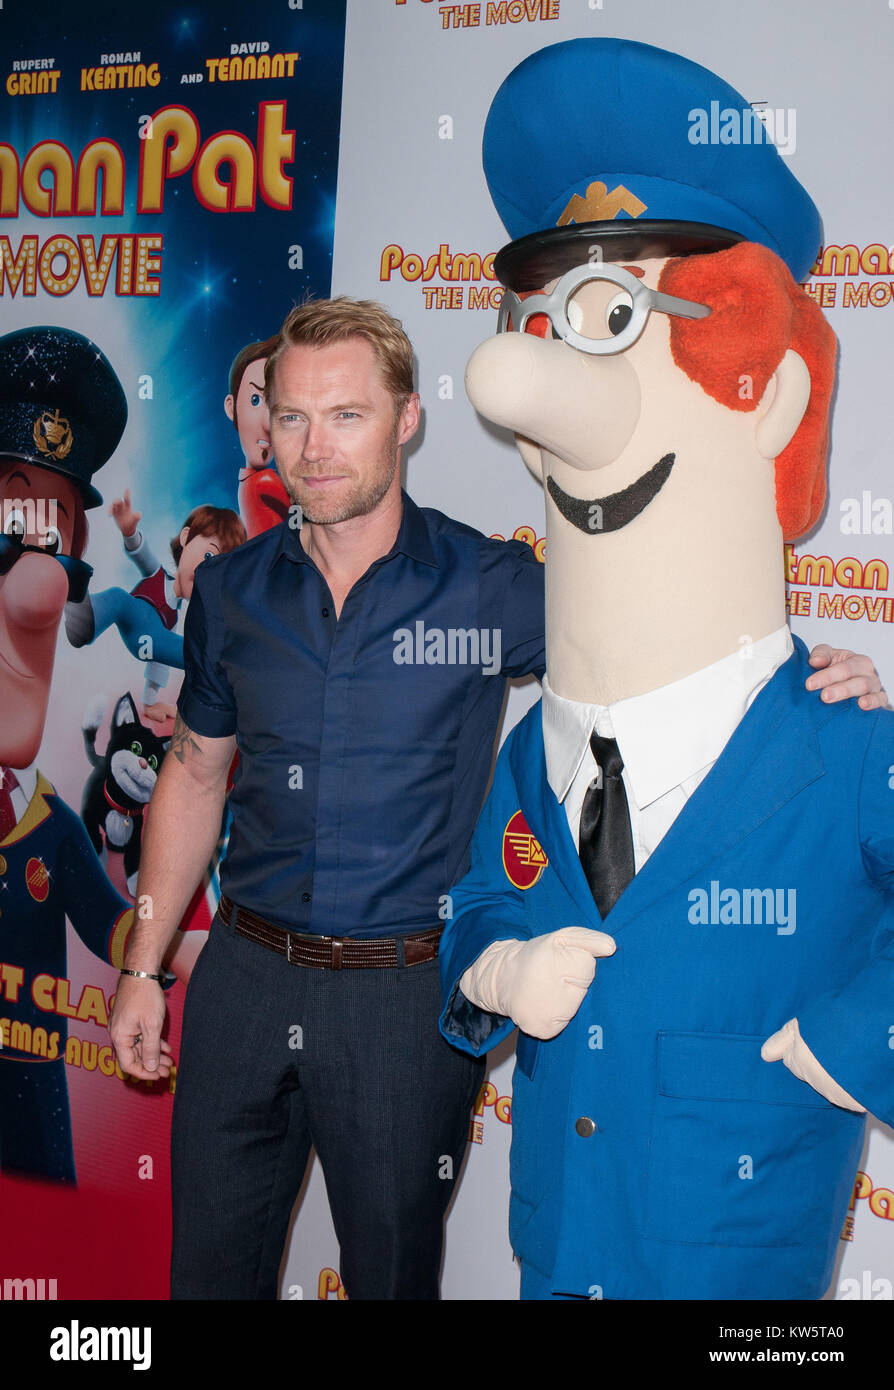 SYDNEY, AUSTRALIA - AUGUST 09: Ronan Keating arrives at the preview screening of 'Postman Pat - The Movie' at Hoyts Entertainment Quarter on August 9, 2014 in Sydney, Australia  People:  Ronan Keating Stock Photo